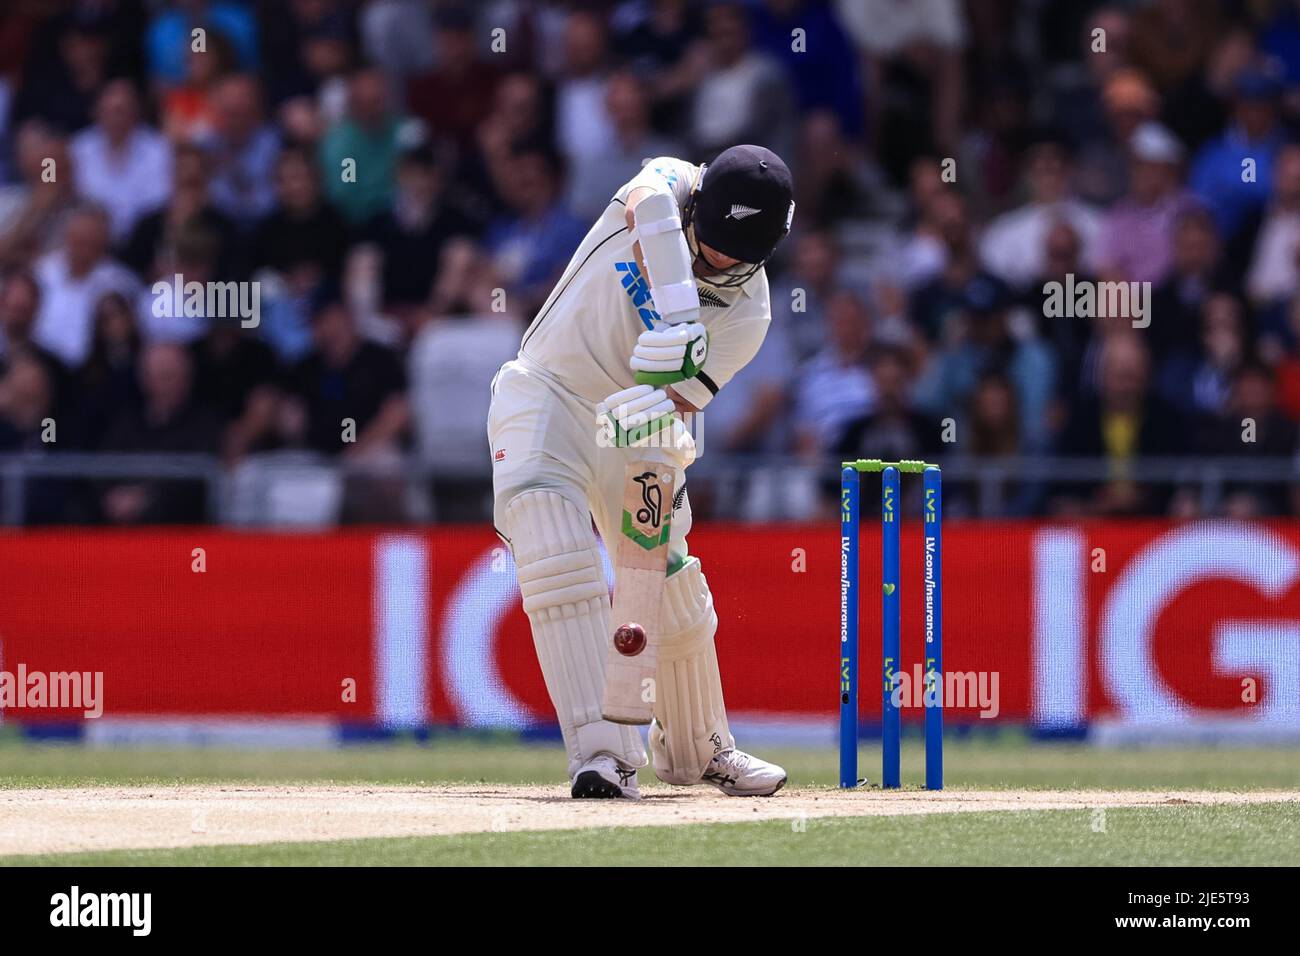 Tom Latham of New Zealand hit a half volley for a four  in Leeds, United Kingdom on 6/25/2022. (Photo by Mark Cosgrove/News Images/Sipa USA) Stock Photo